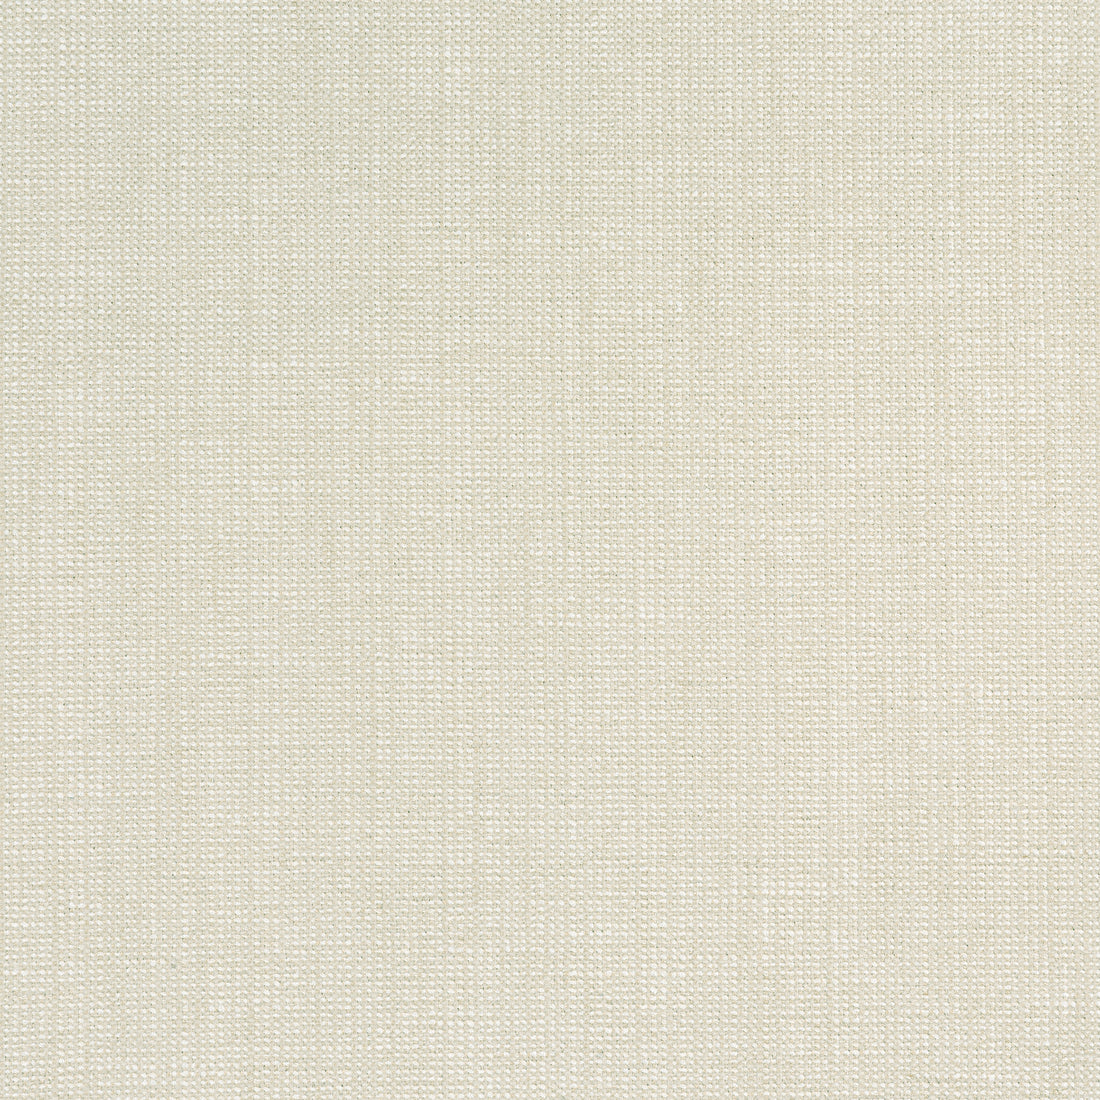 Sacchi fabric in flax color - pattern number W8754 - by Thibaut in the Haven Textures collection